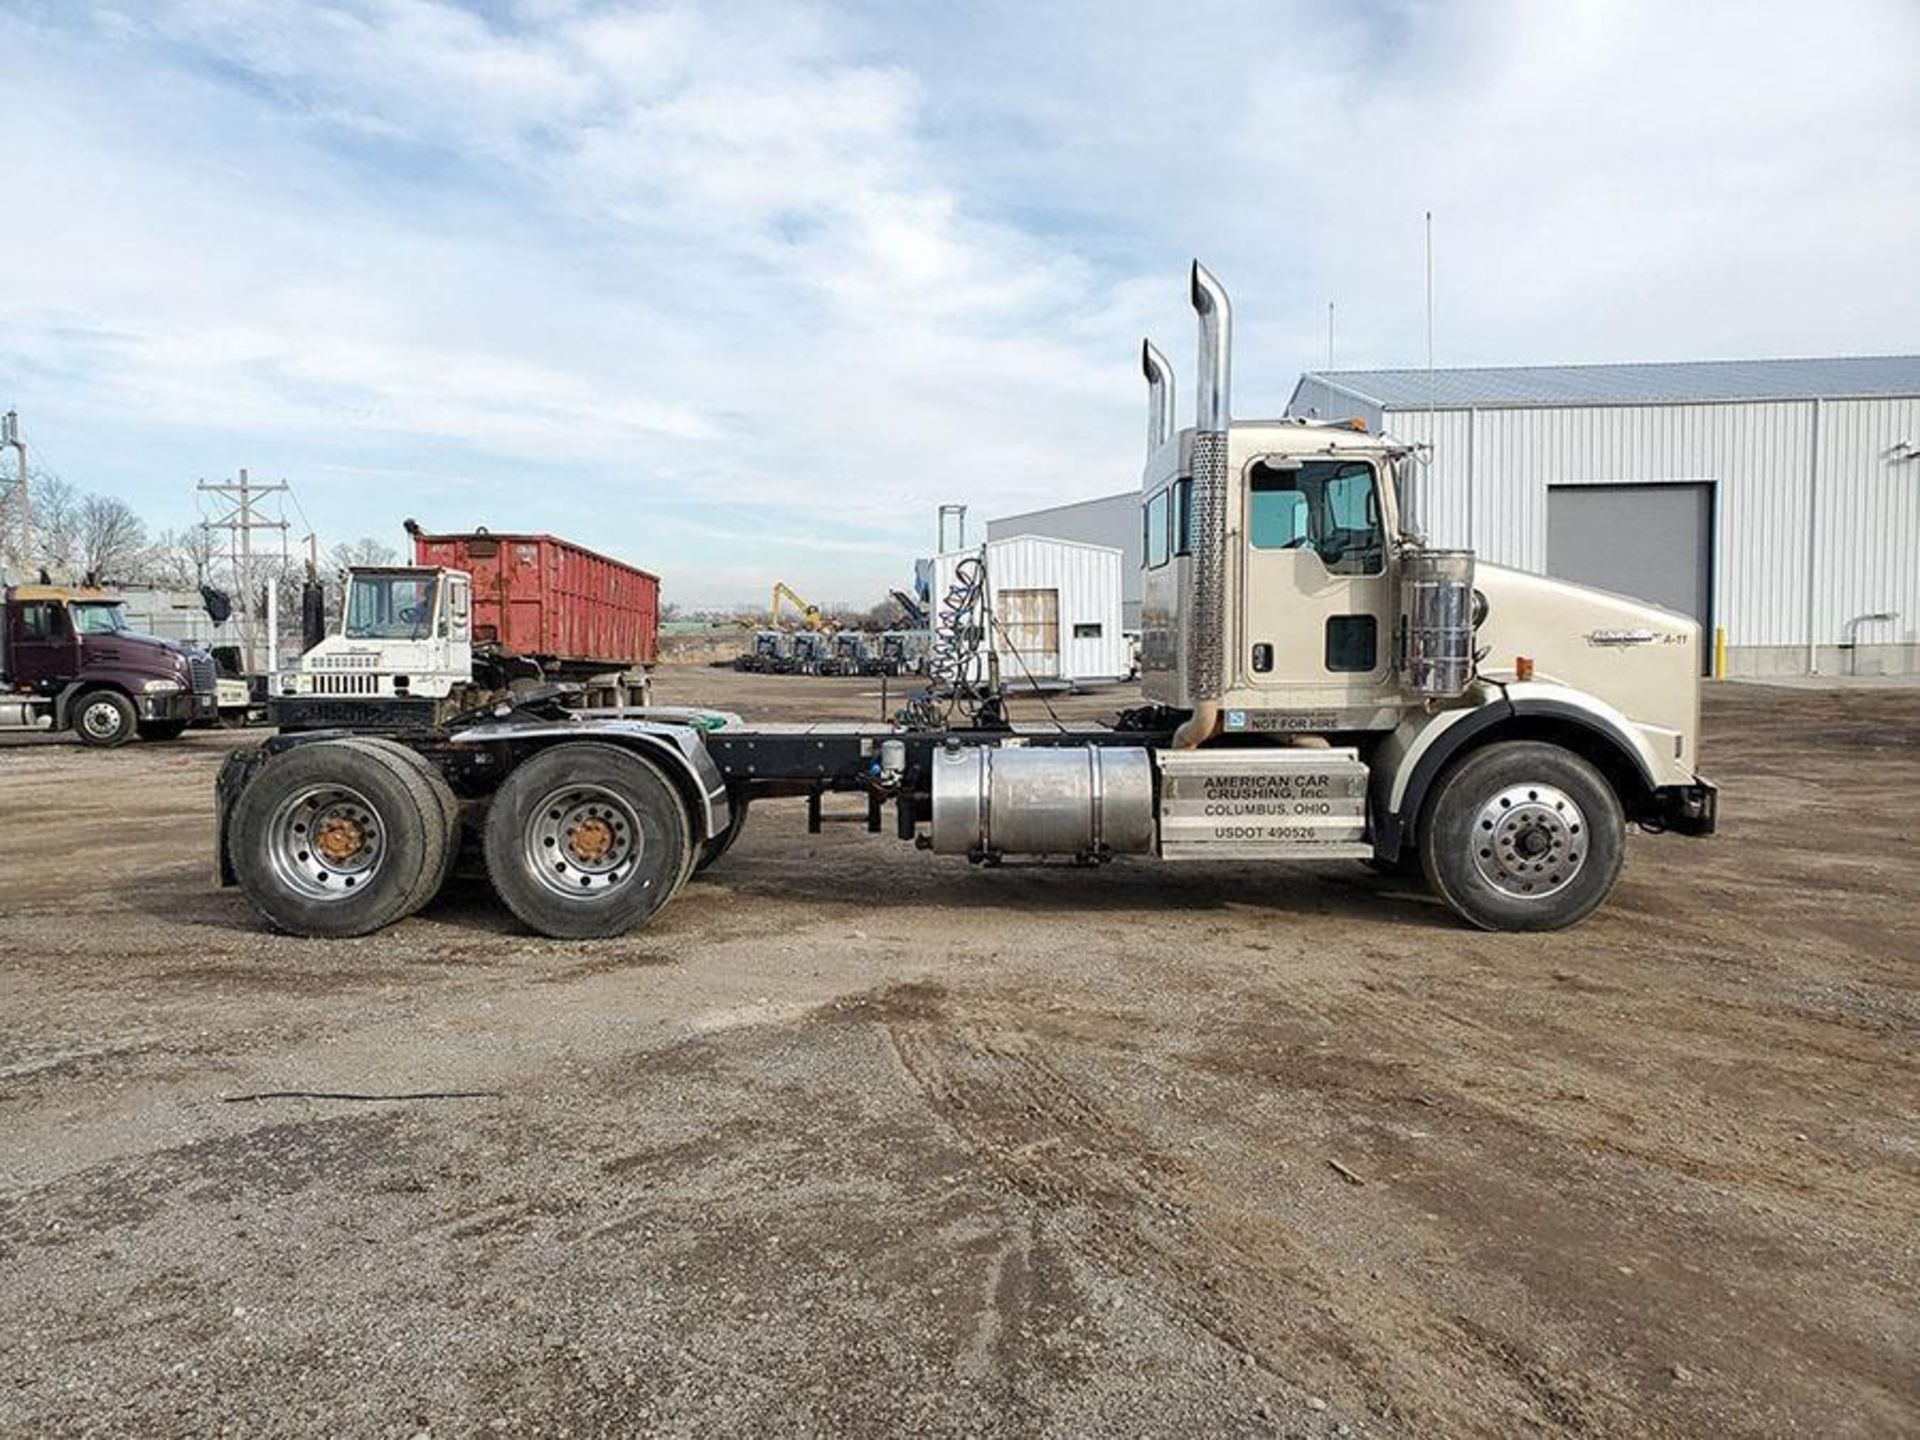 2009 Kenworth Truck Tractors, Vin 1NKDLU0X39J256958, Tandem Axle, Day Cab, Extended Frame, C-13 Engi - Image 4 of 13